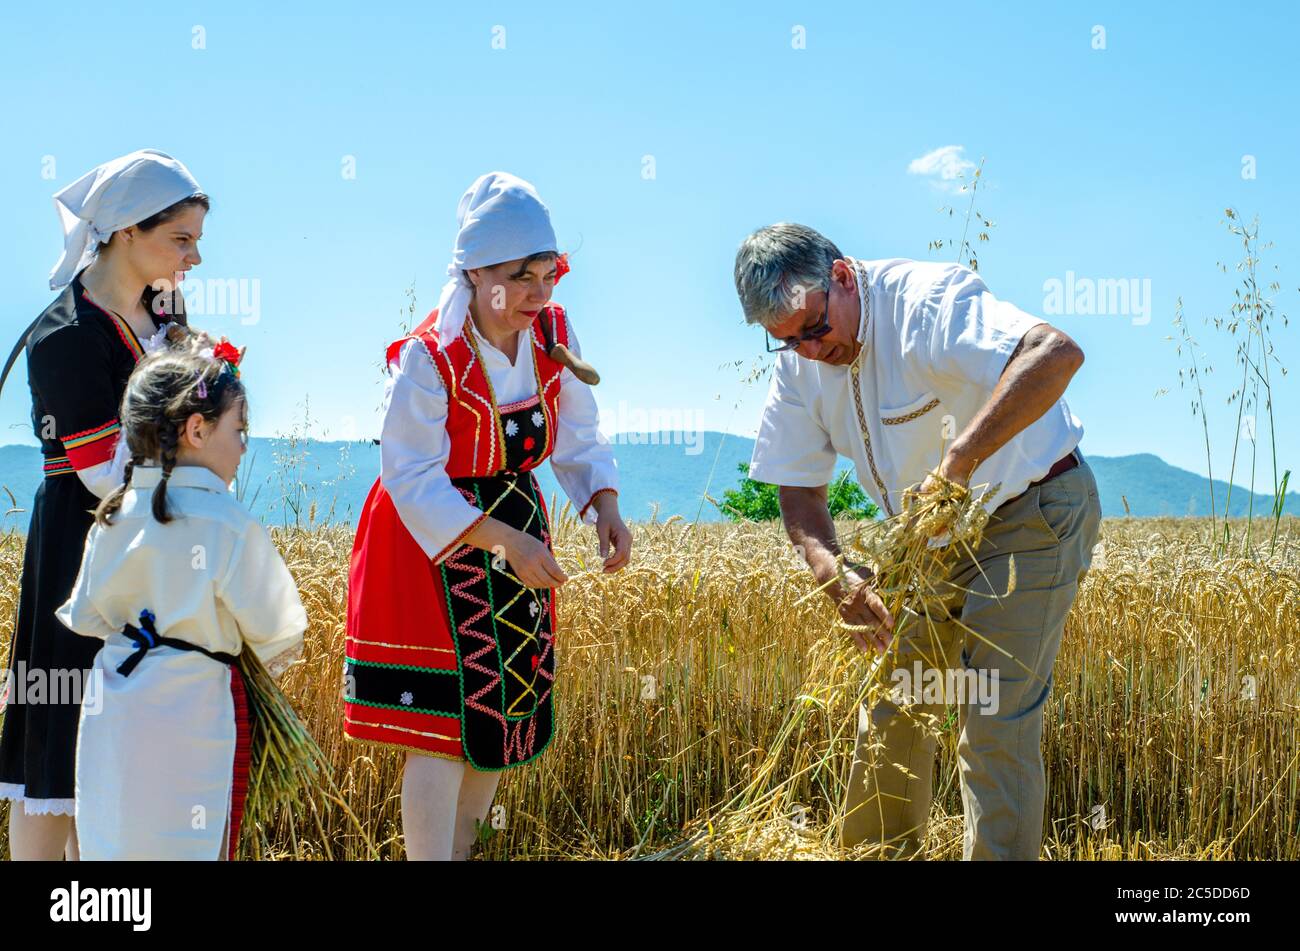 Bulgarians in traditional costume celebrate local custom of wheat harvest in countryside village. Stock Photo